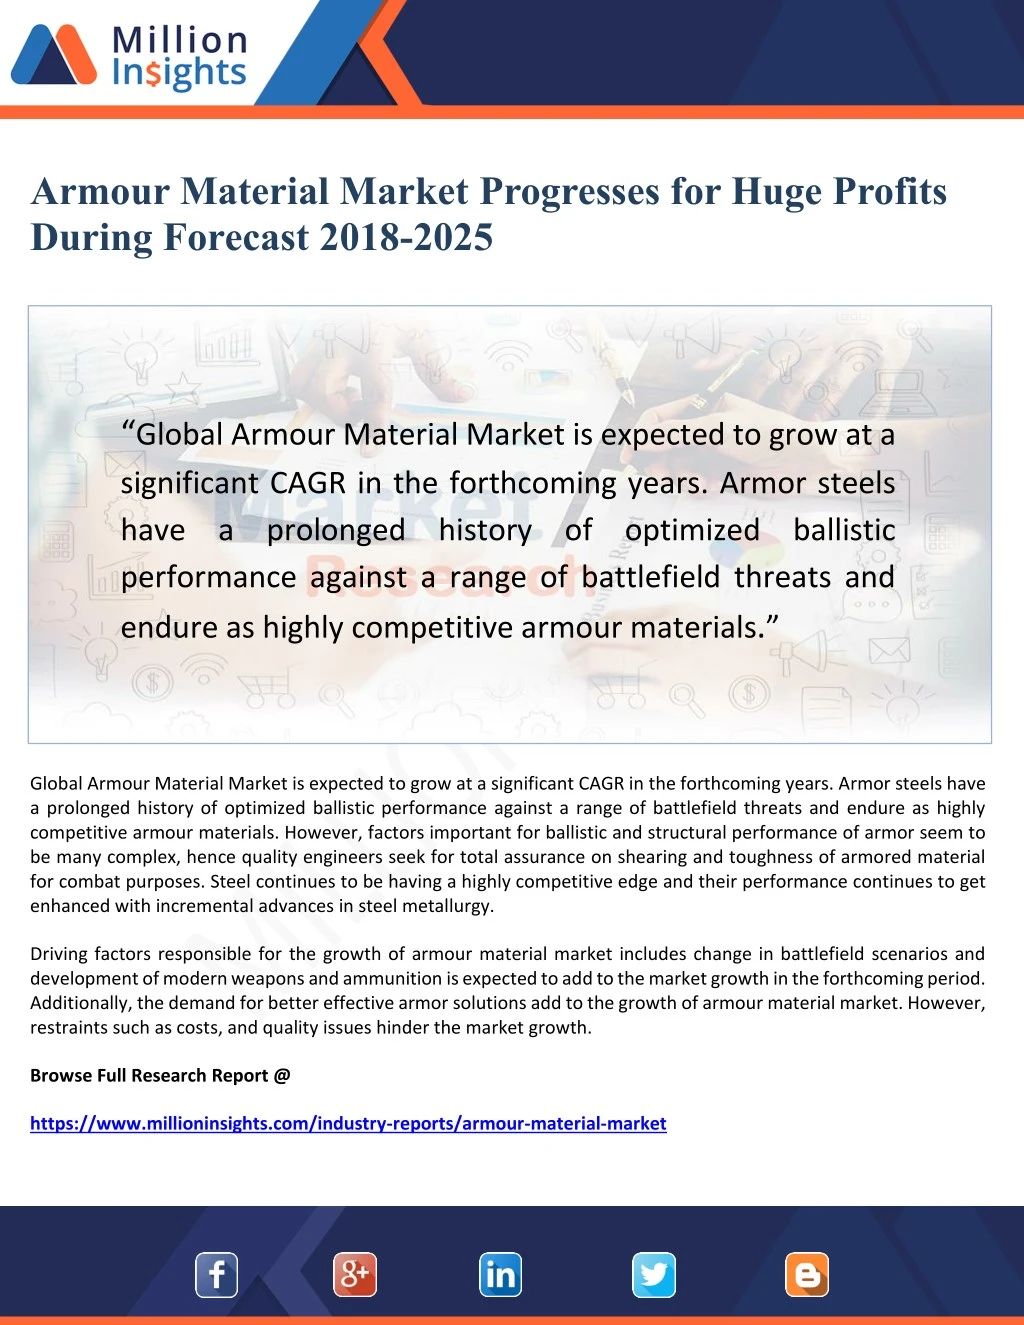 armour material market progresses for huge